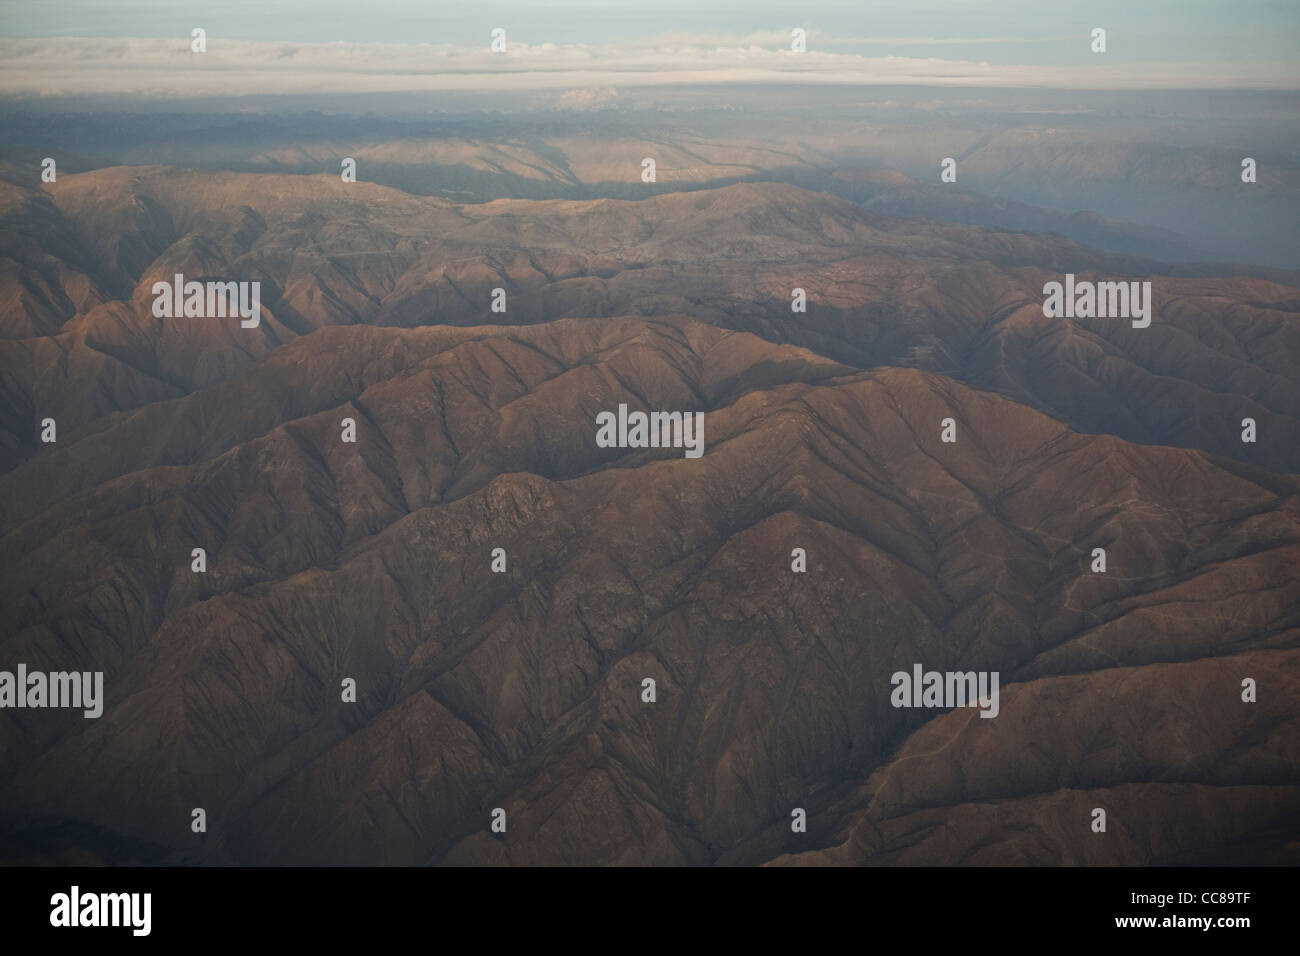 Aeriel view of Andes Mountains, central Peru, South America. Stock Photo